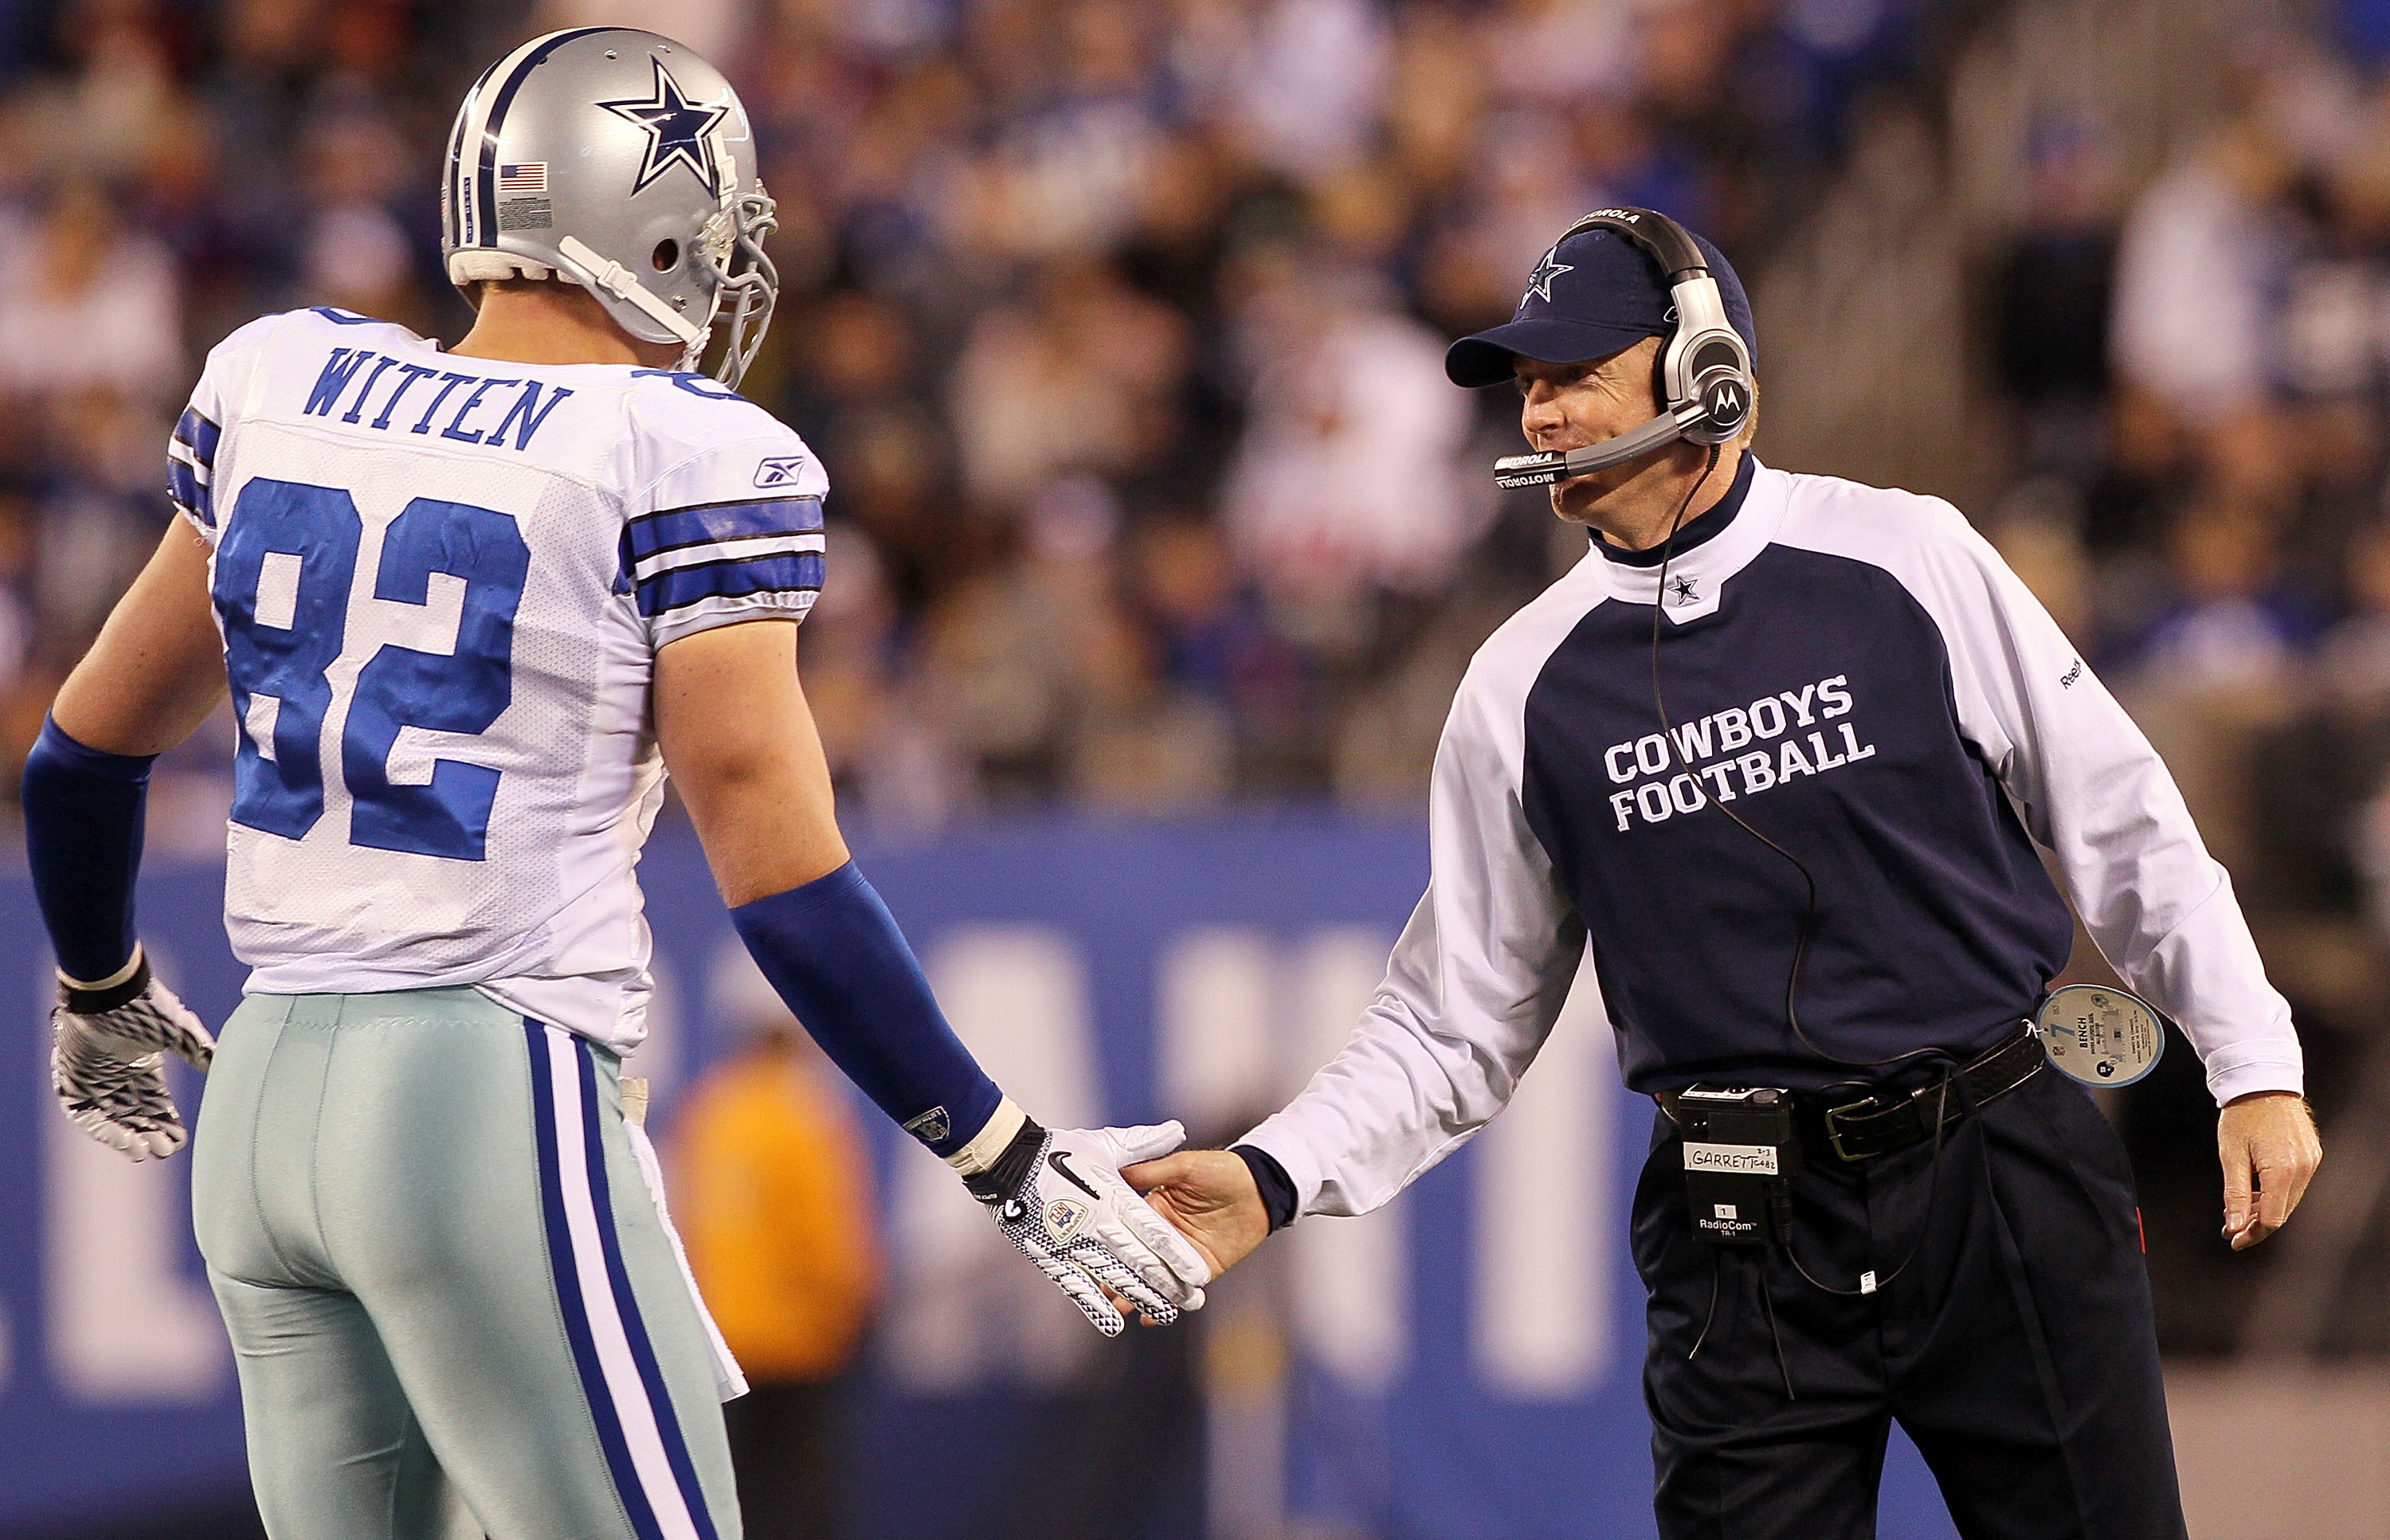 Cowboys find rhythm to beat Giants on Thanksgiving, gain ground in NFC East